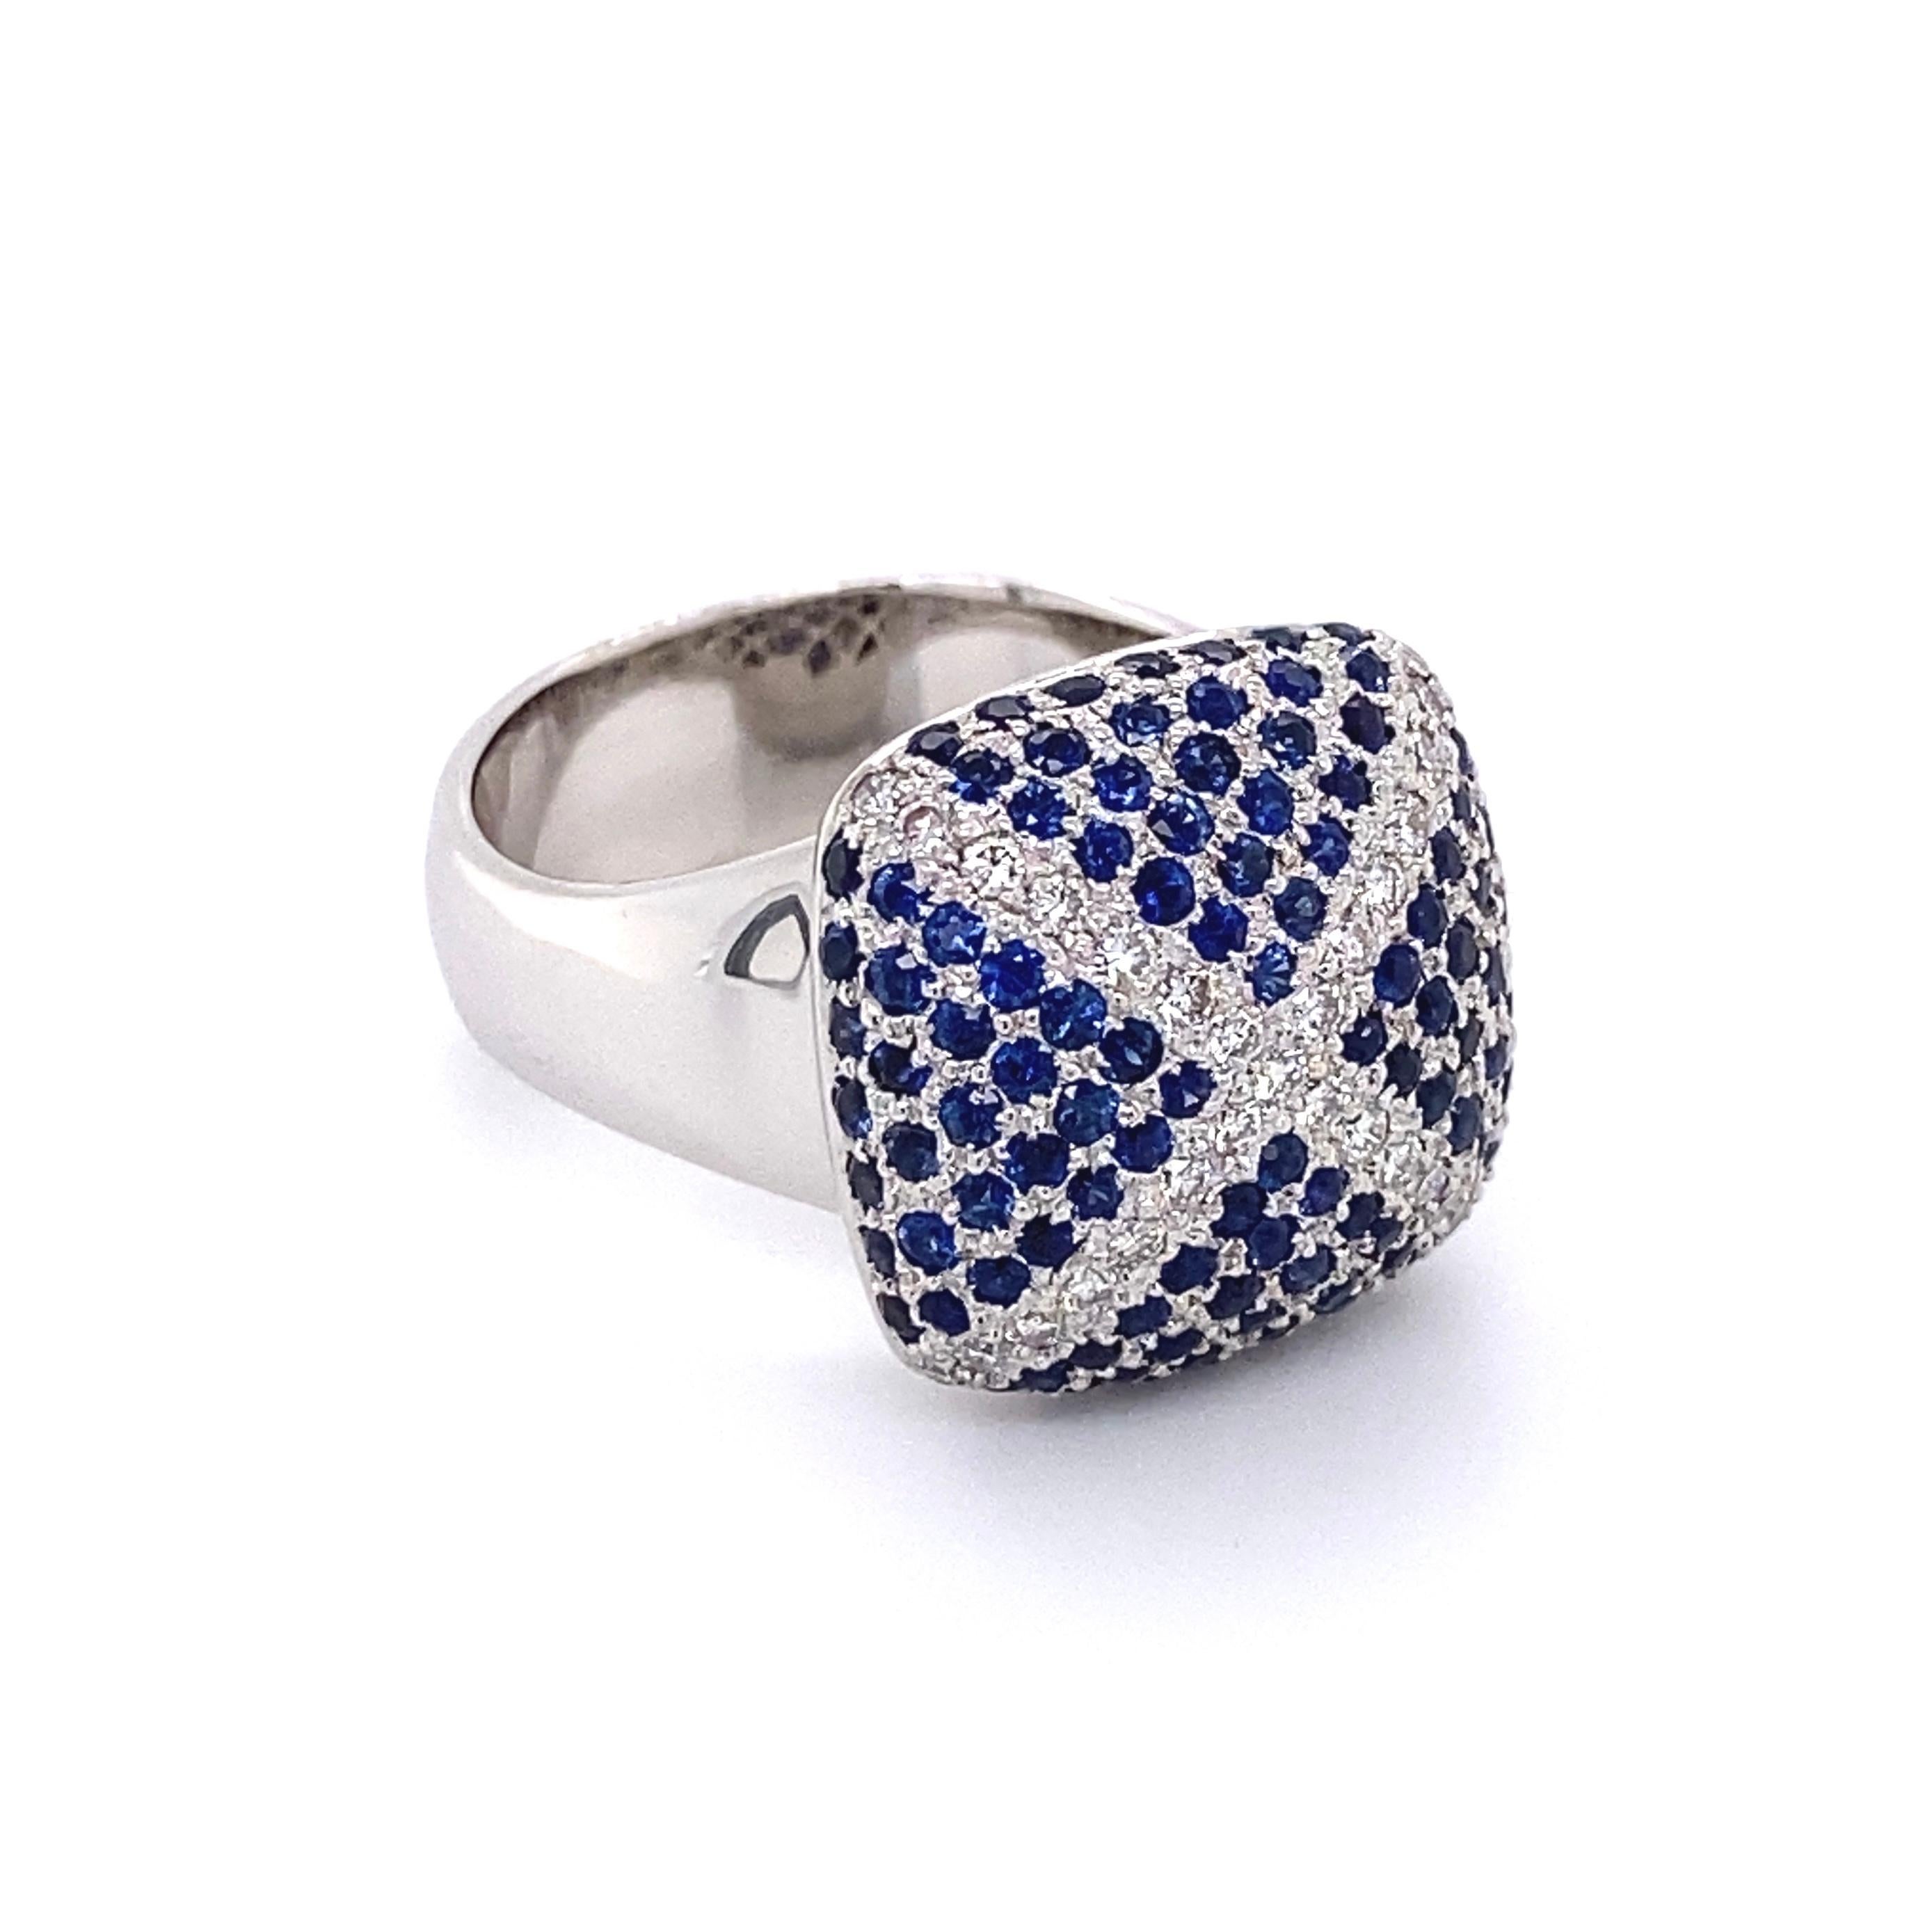 Simply Beautiful! Finely Detailed Sapphire and Diamond Pillow Cushion Gold Ring. Encrusted with Blue Sapphires, approx. 1.79tcw and Diamonds, approx. 0.38tcw. Hand crafted in 18K White Gold. Measuring approx. 1.12” l x 0.87” w x 0.66” h. Ring size: